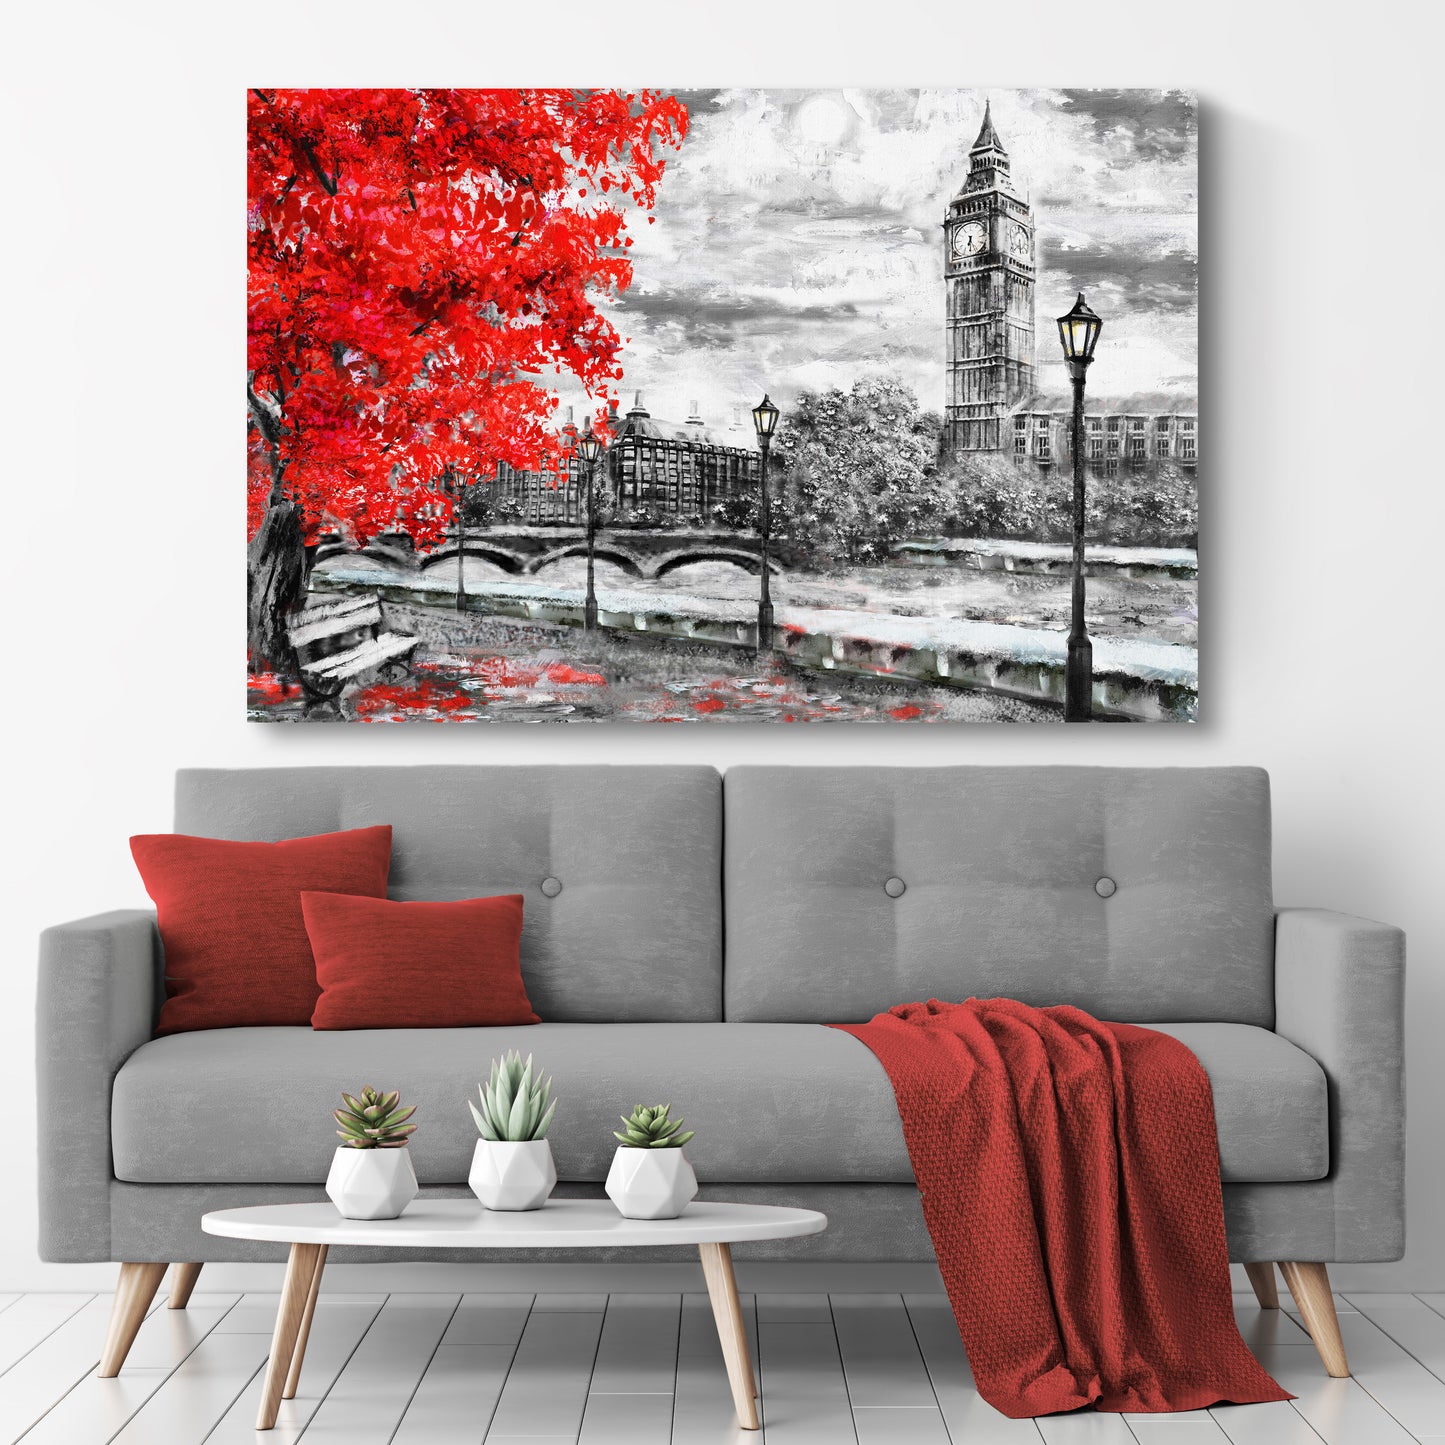 Stunning Red Autumn Tree Wall Art Canvas Style 2 - Image by Tailored Canvases